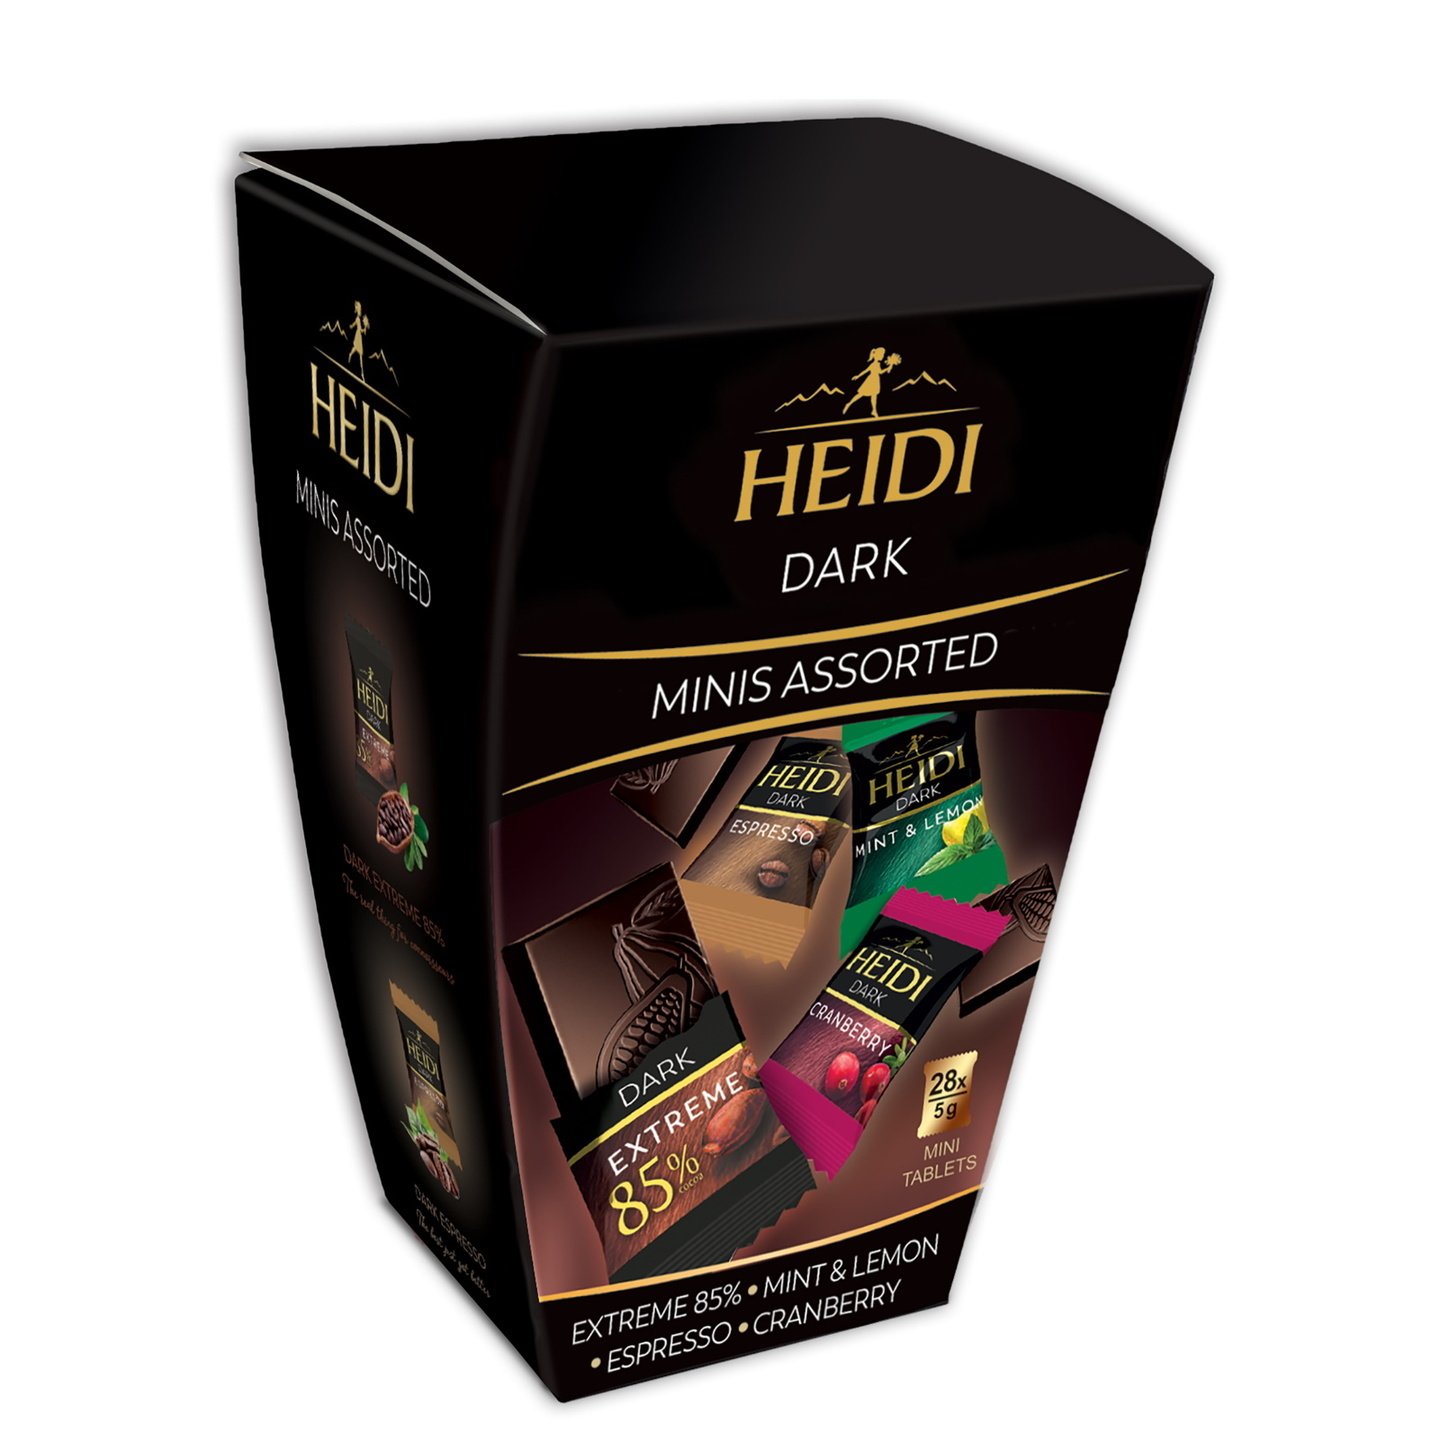 Heidi Dark Assorted Chocolate Mini Bites - Individually Wrapped 28 x 5gm Tablets (Dark 85% Mint and Lemon Espresso and Cranberry) in an attractive Gift Box 1 x 140gm